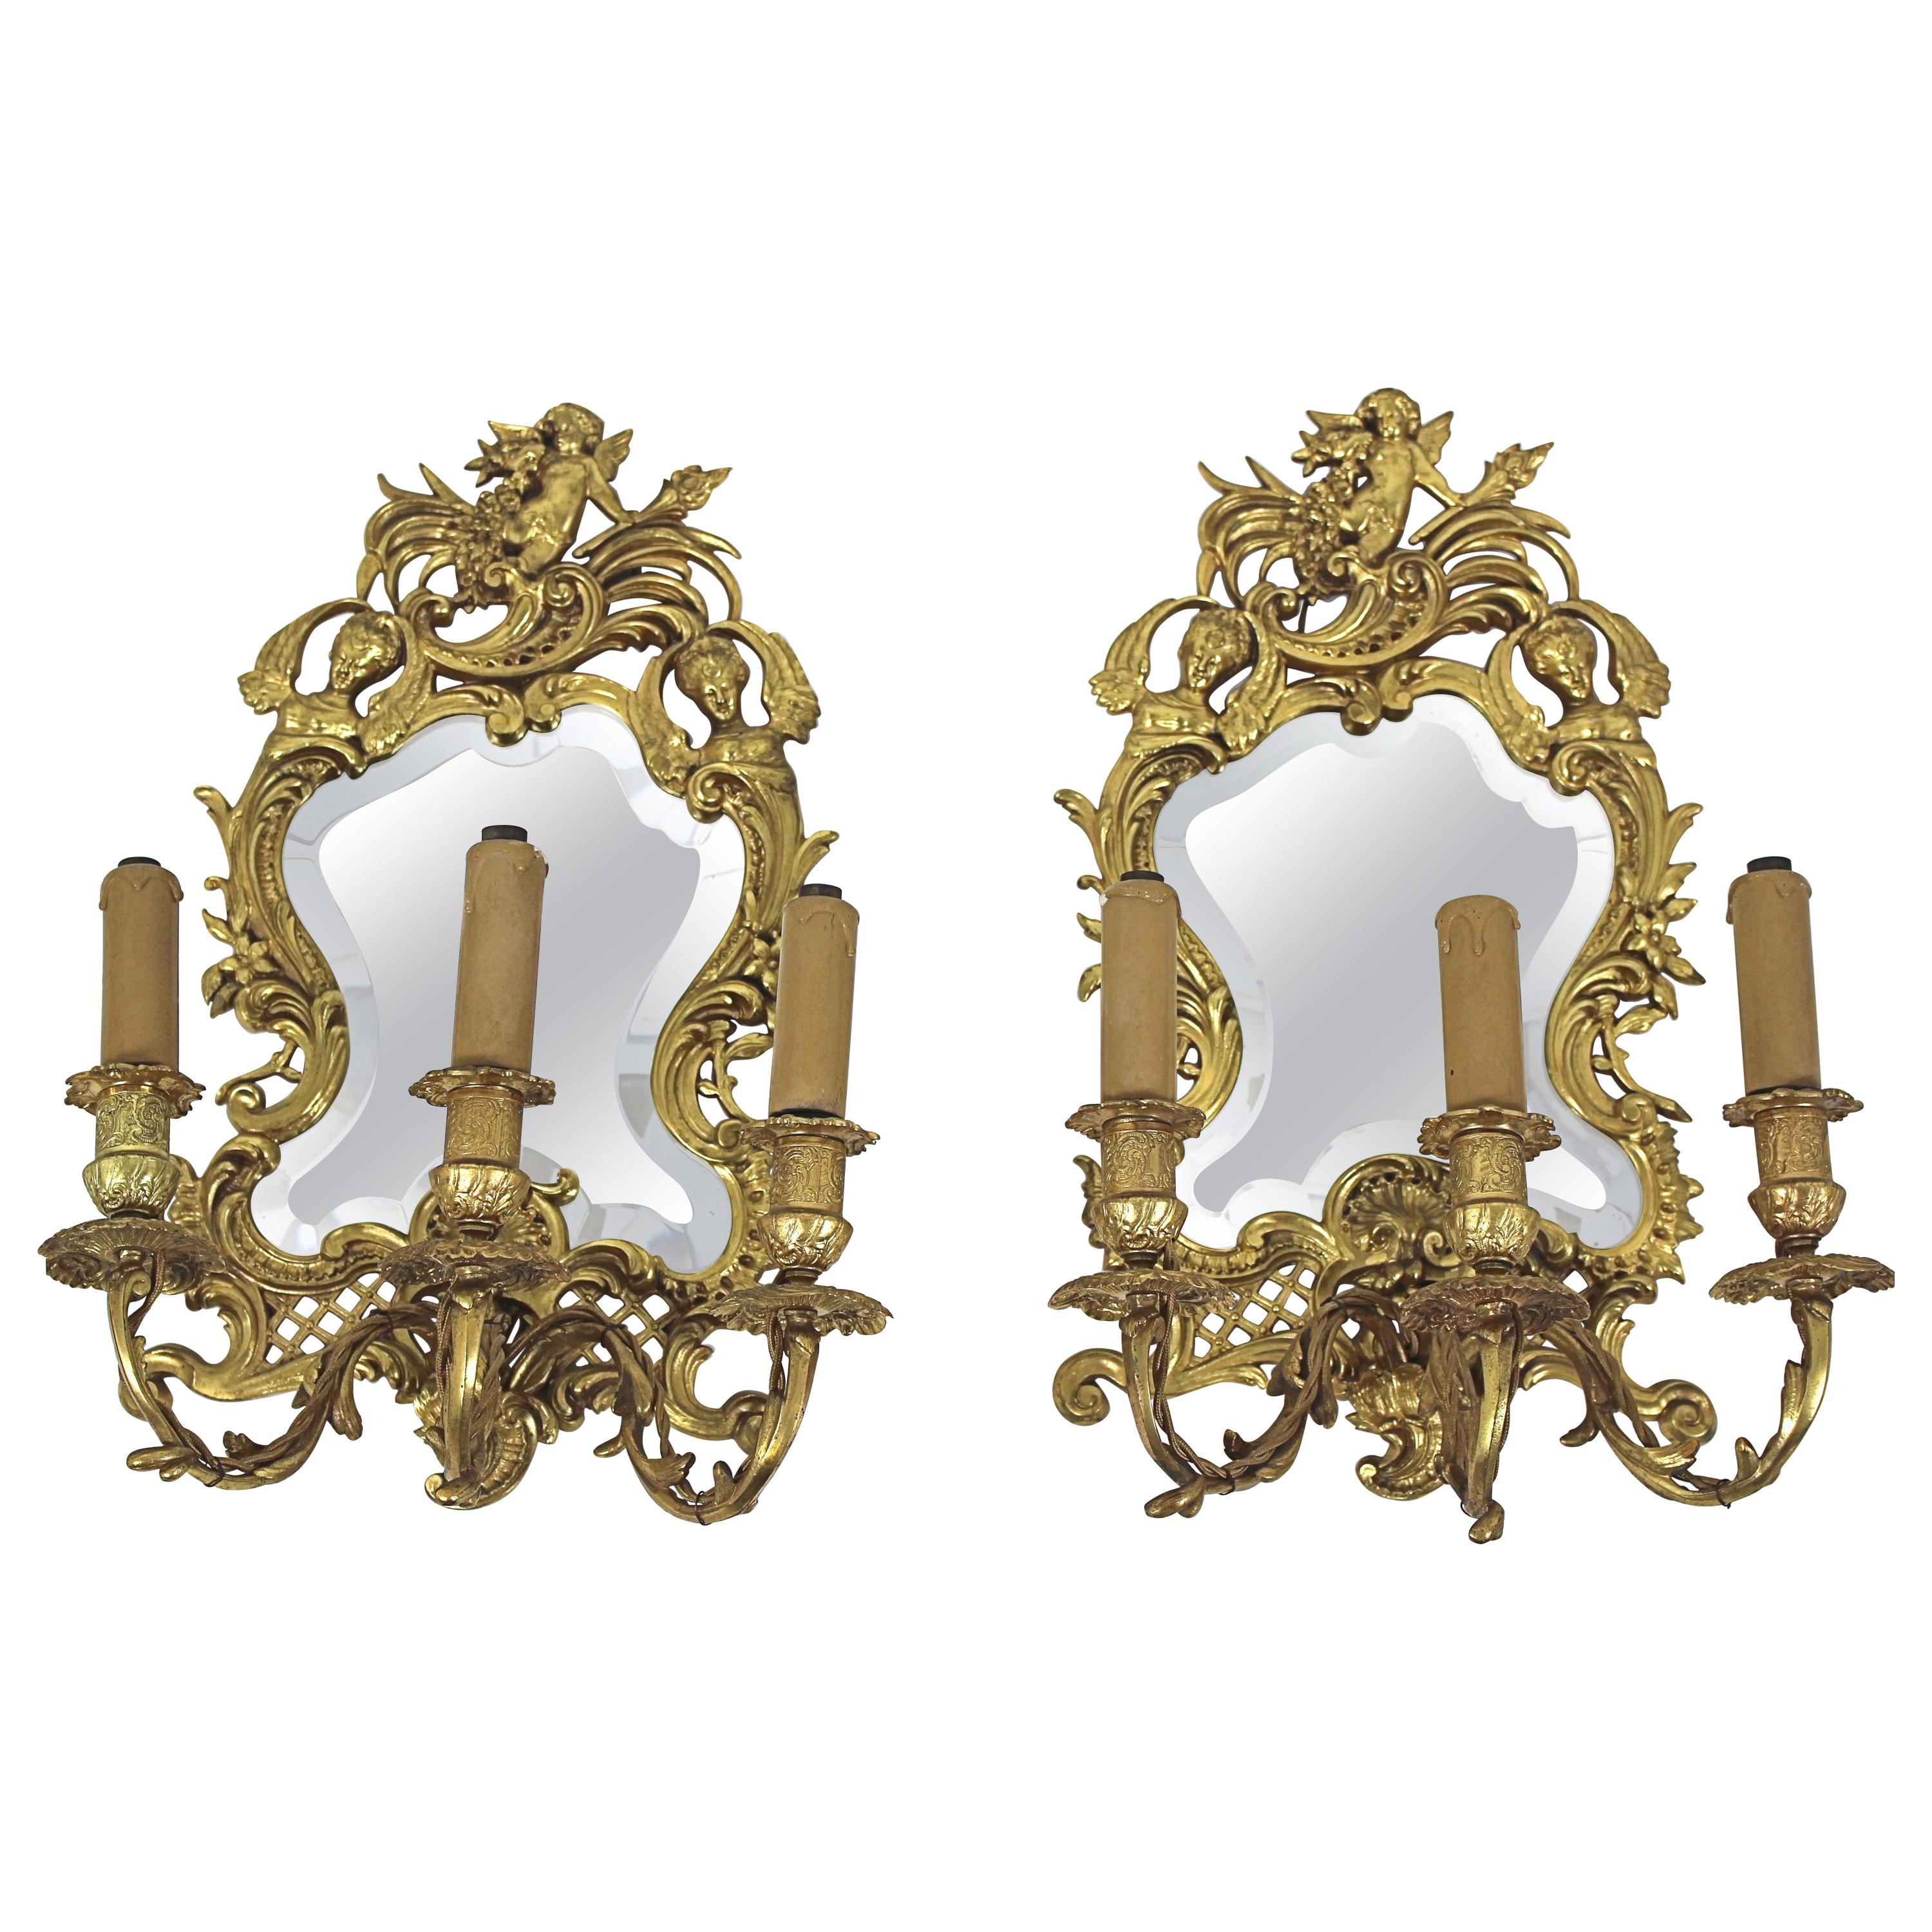 Pair of 19th Century French Ormolu Girondelles For Sale